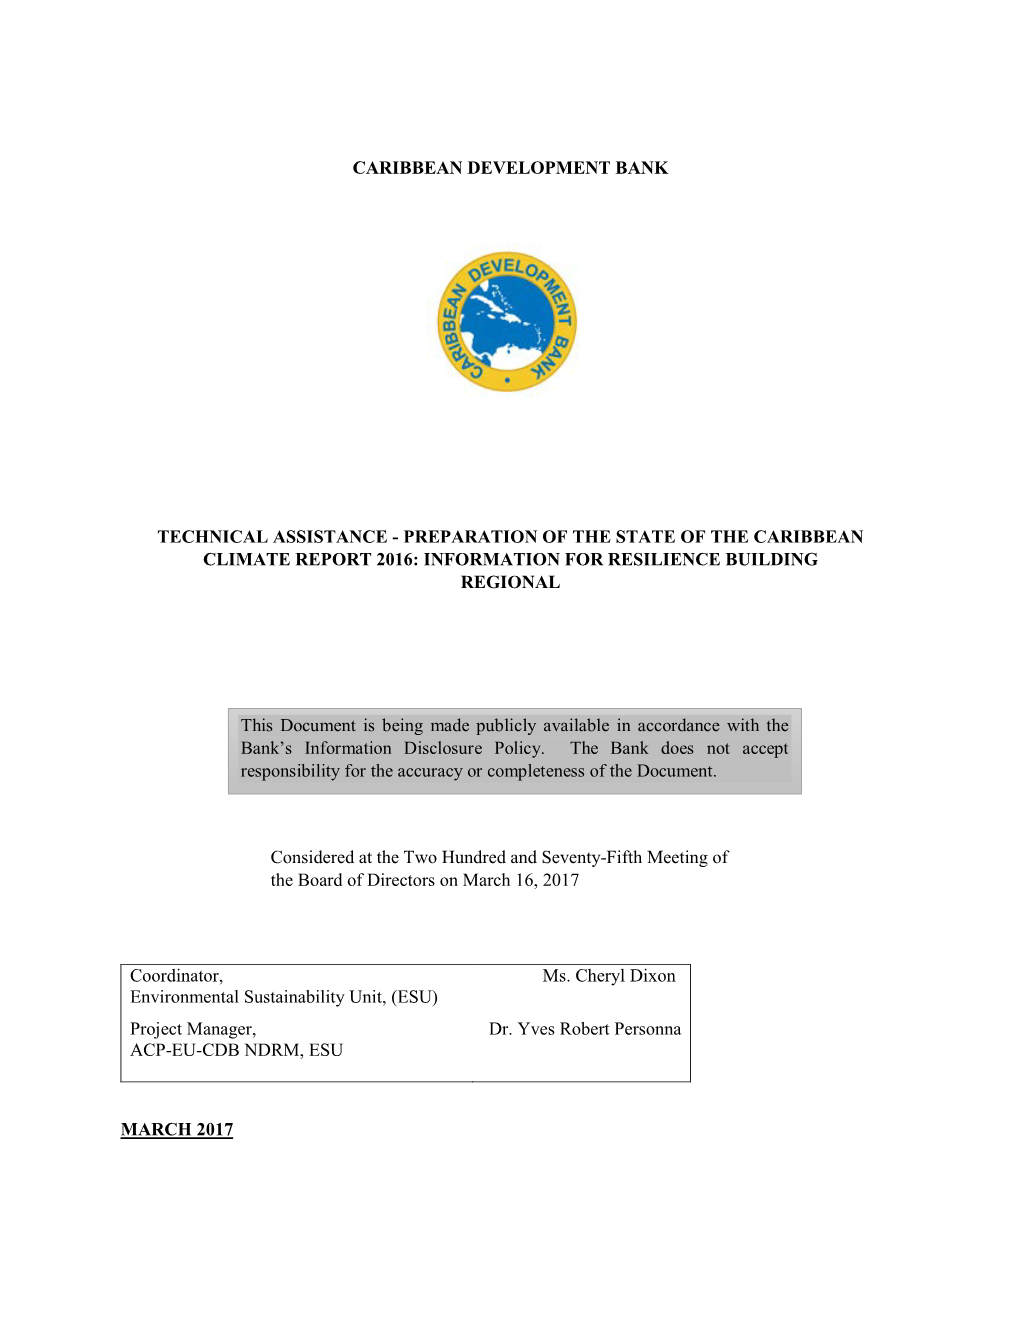 Preparation of the State of the Caribbean Climate Report 2016: Information for Resilience Building Regional